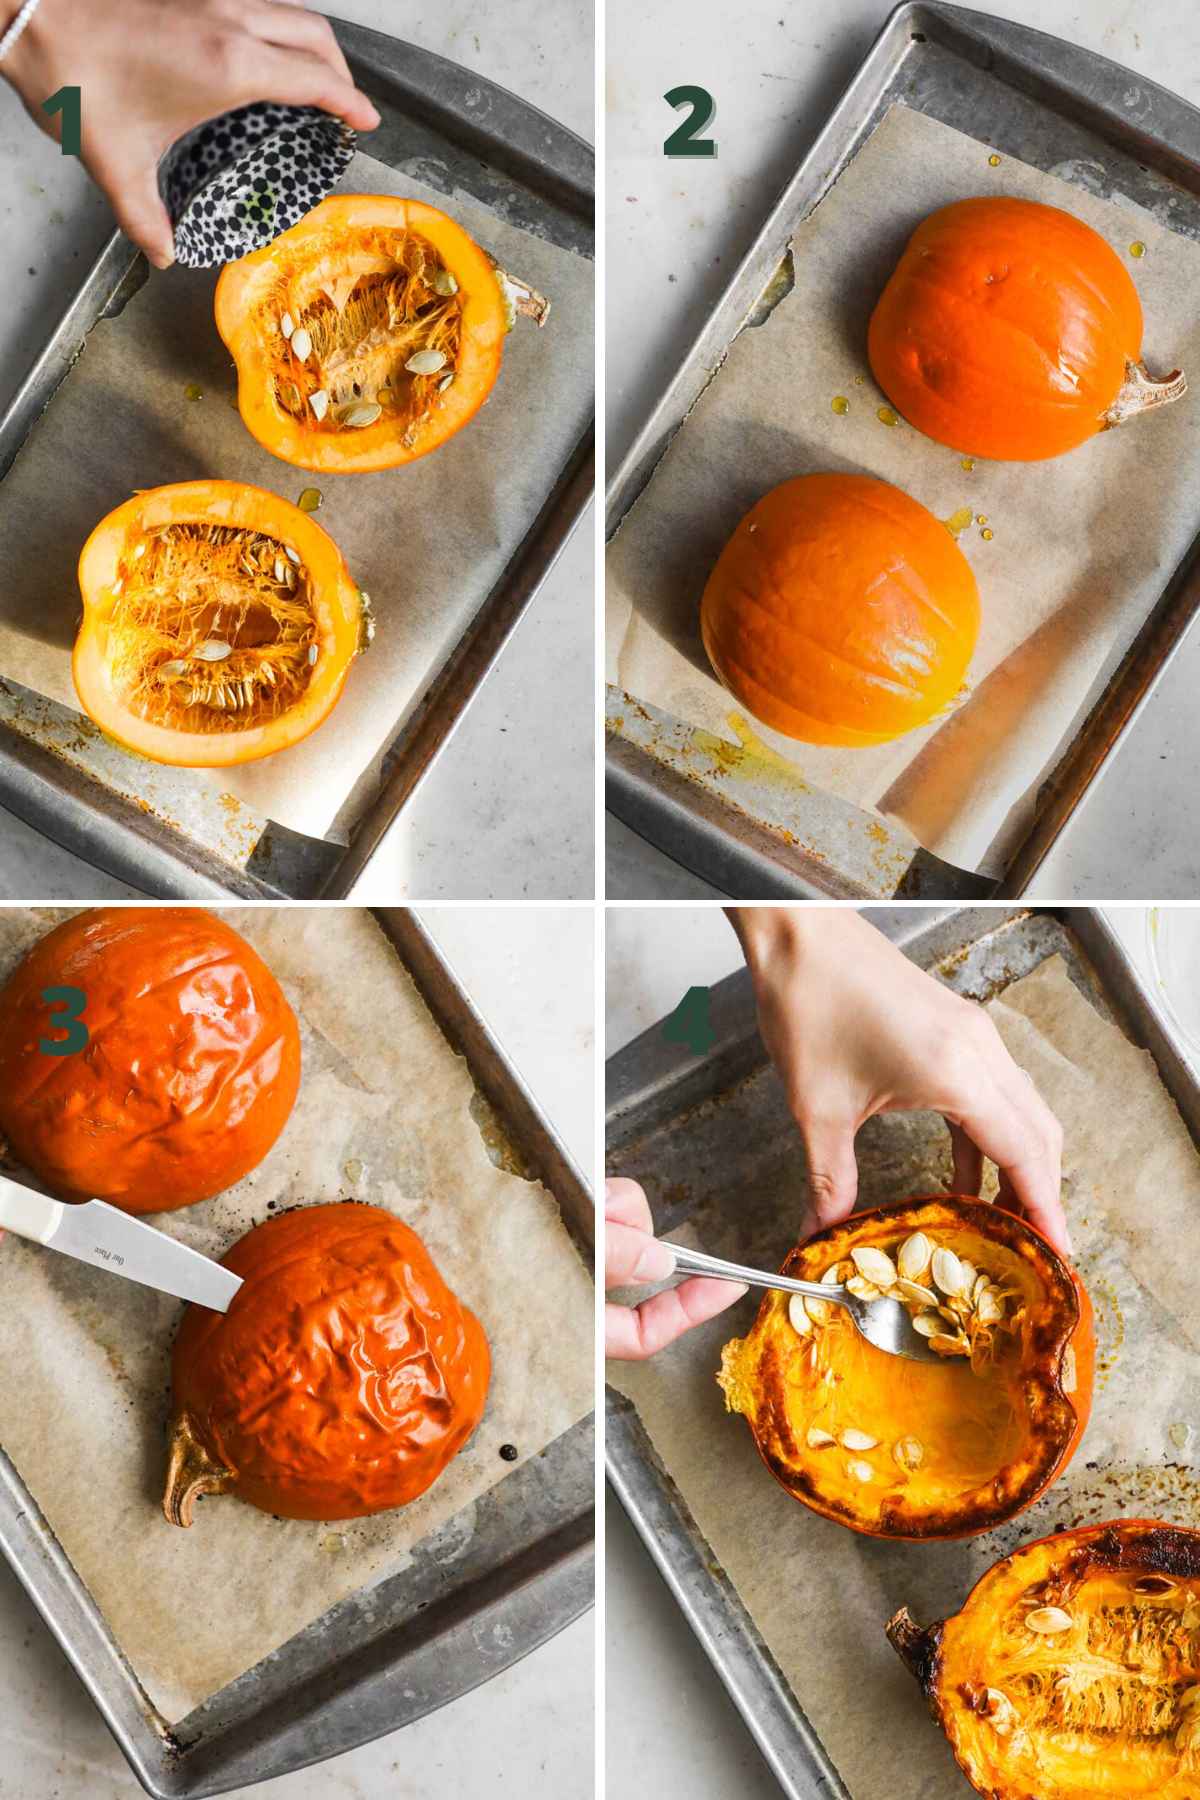 Steps to roast a whole sugar pie pumpkin, cut pumpkin in half, brush with olive oil and season, roast, remove seeds.